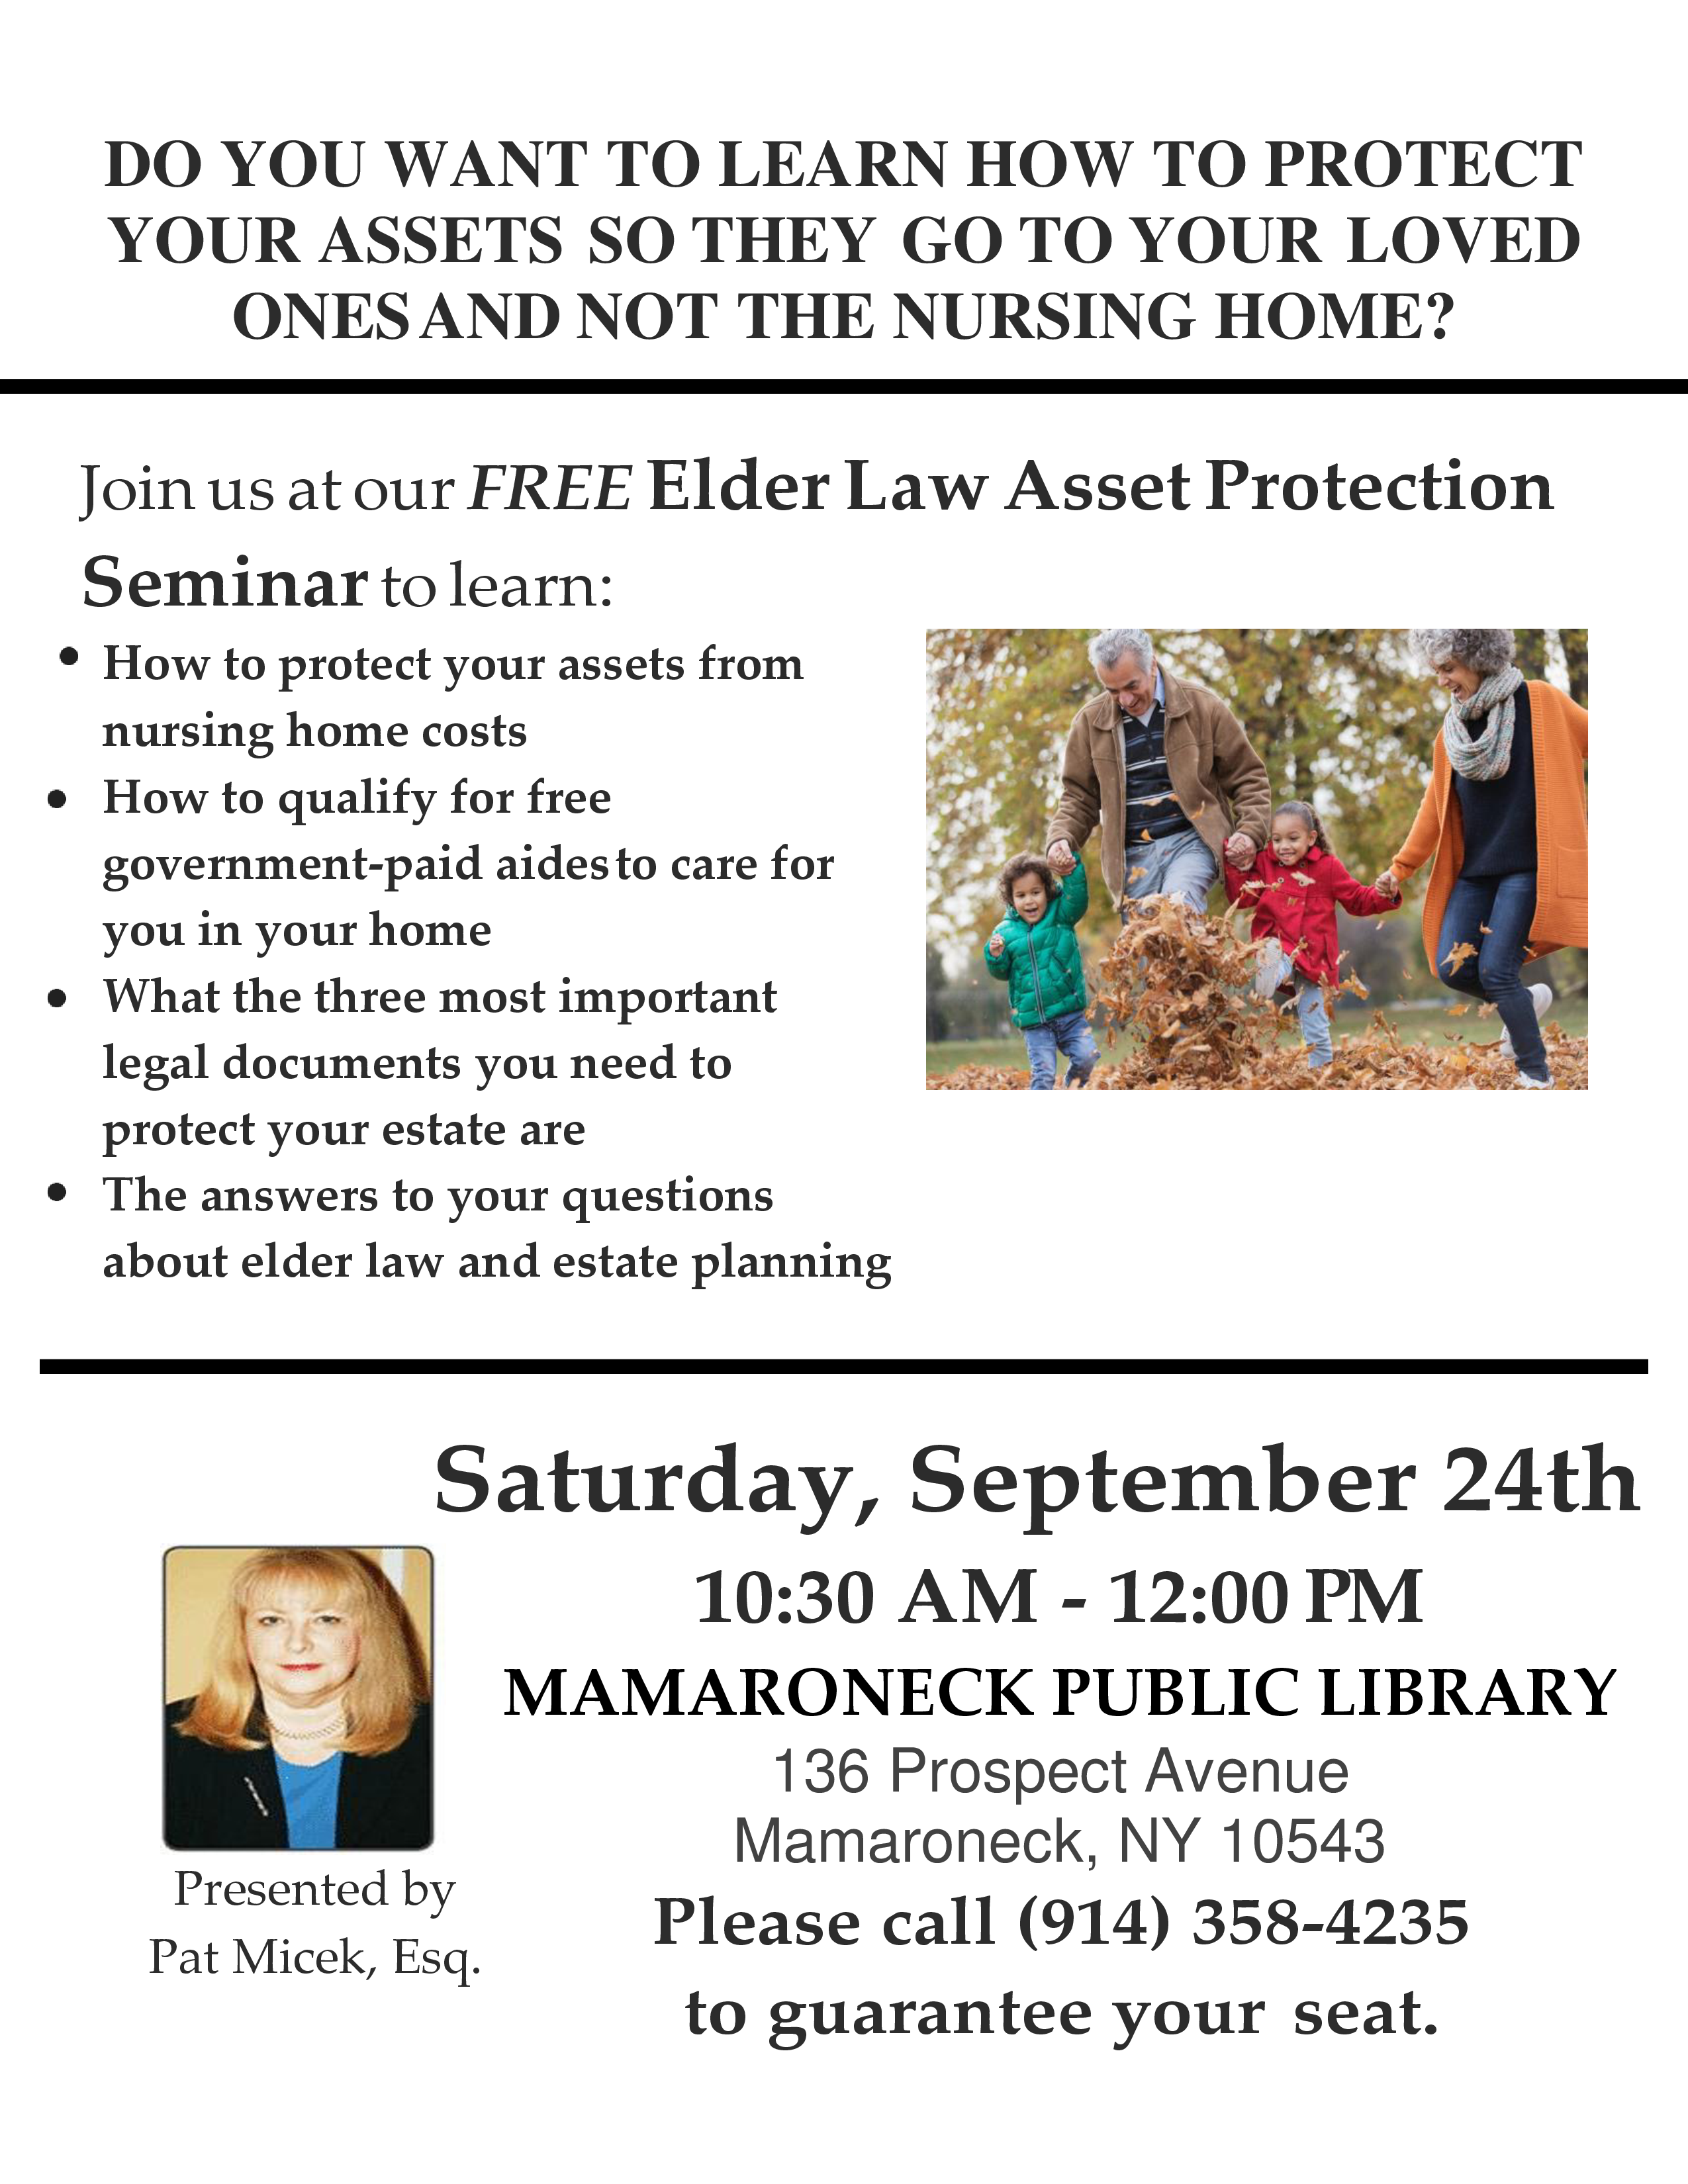 Sept. 24th Elder Law Protect Your Assets seminar with Pat Micek